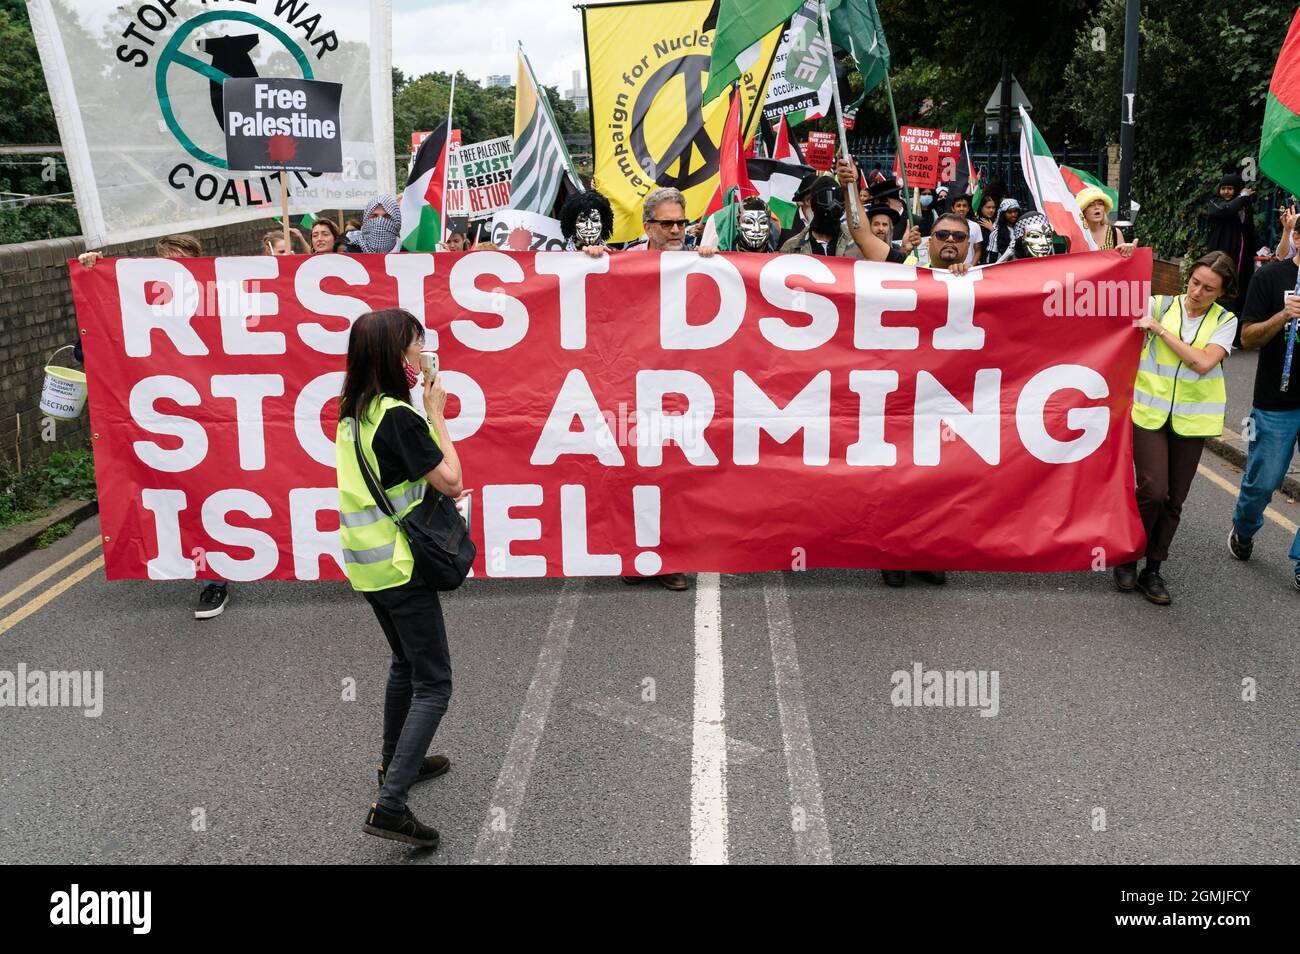 London, UK. 12 September 2021. Protesters march in opposition to the world’s largest arms fair, Defence and Security Equipment International (DSEI) Stock Photo